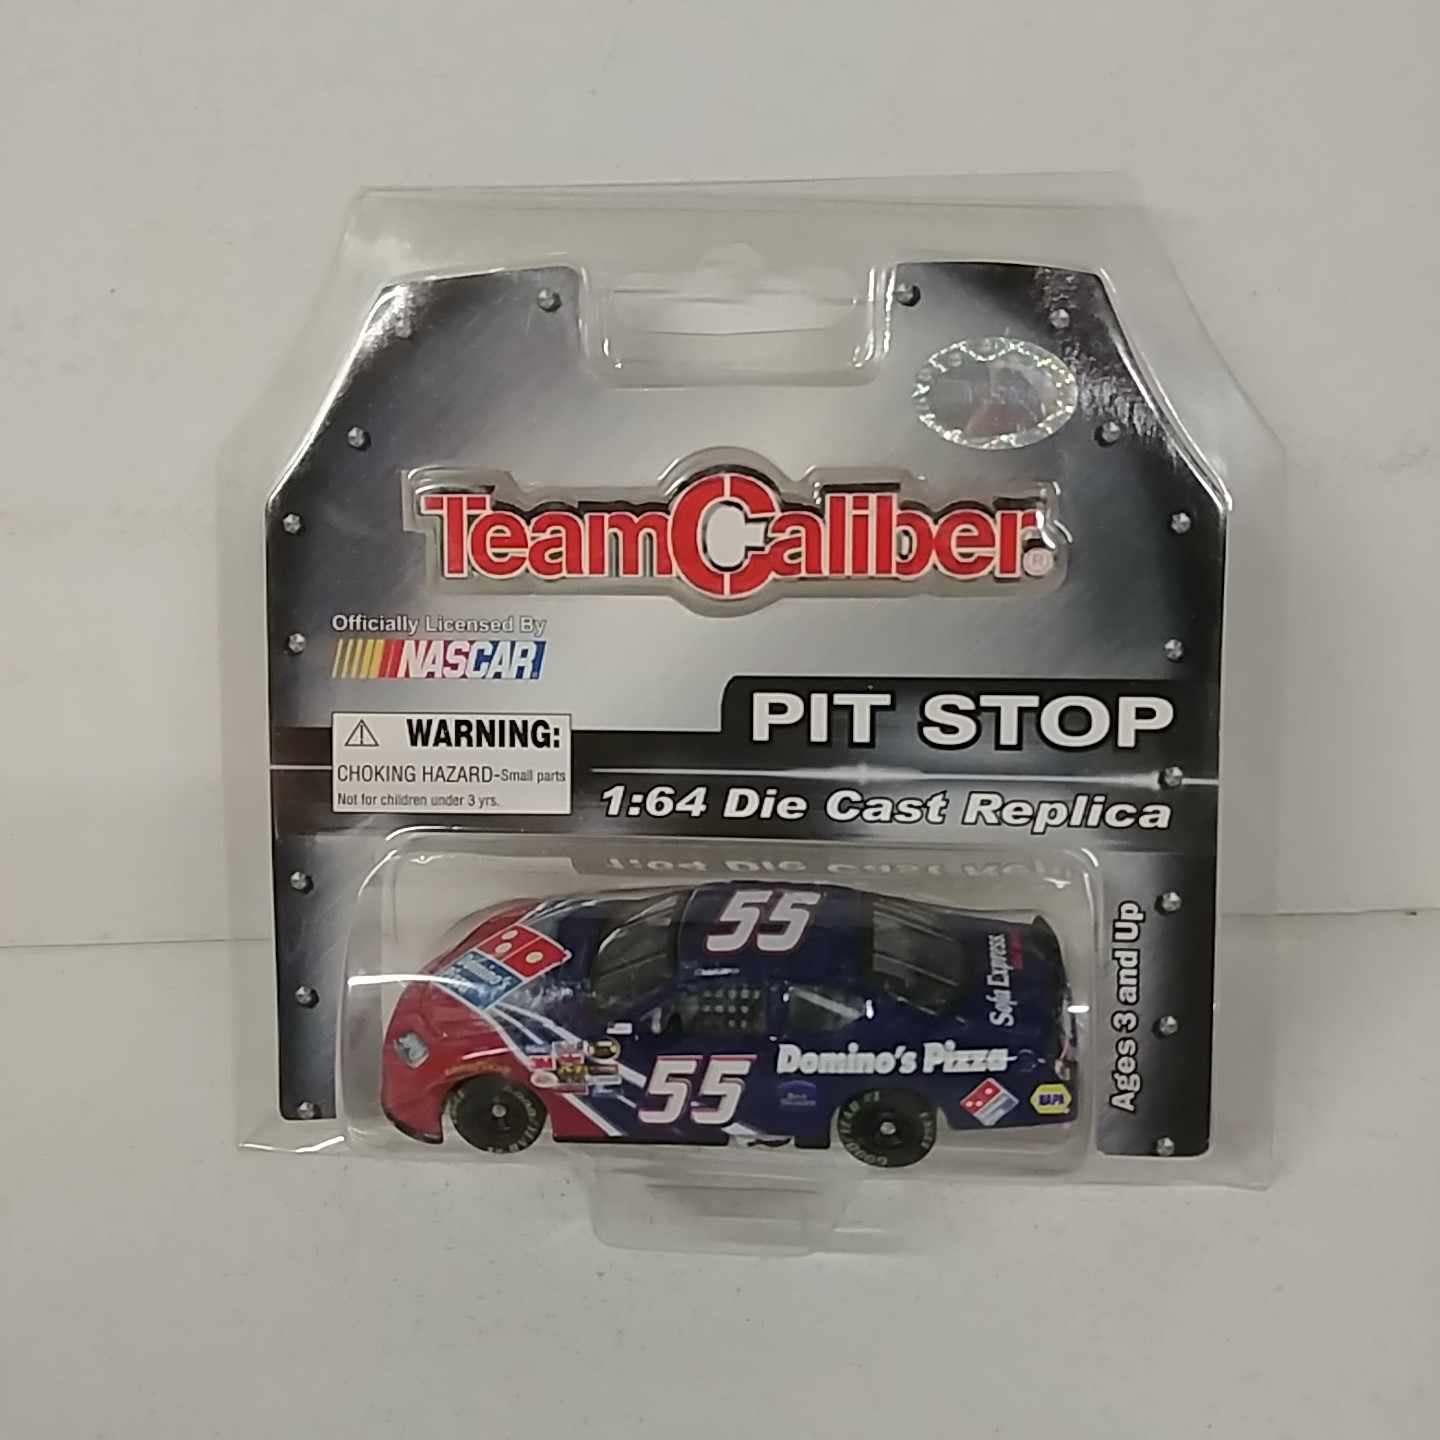 2006 Michael Waltrip 1/64th Domino's Pizza Pitstop Series car